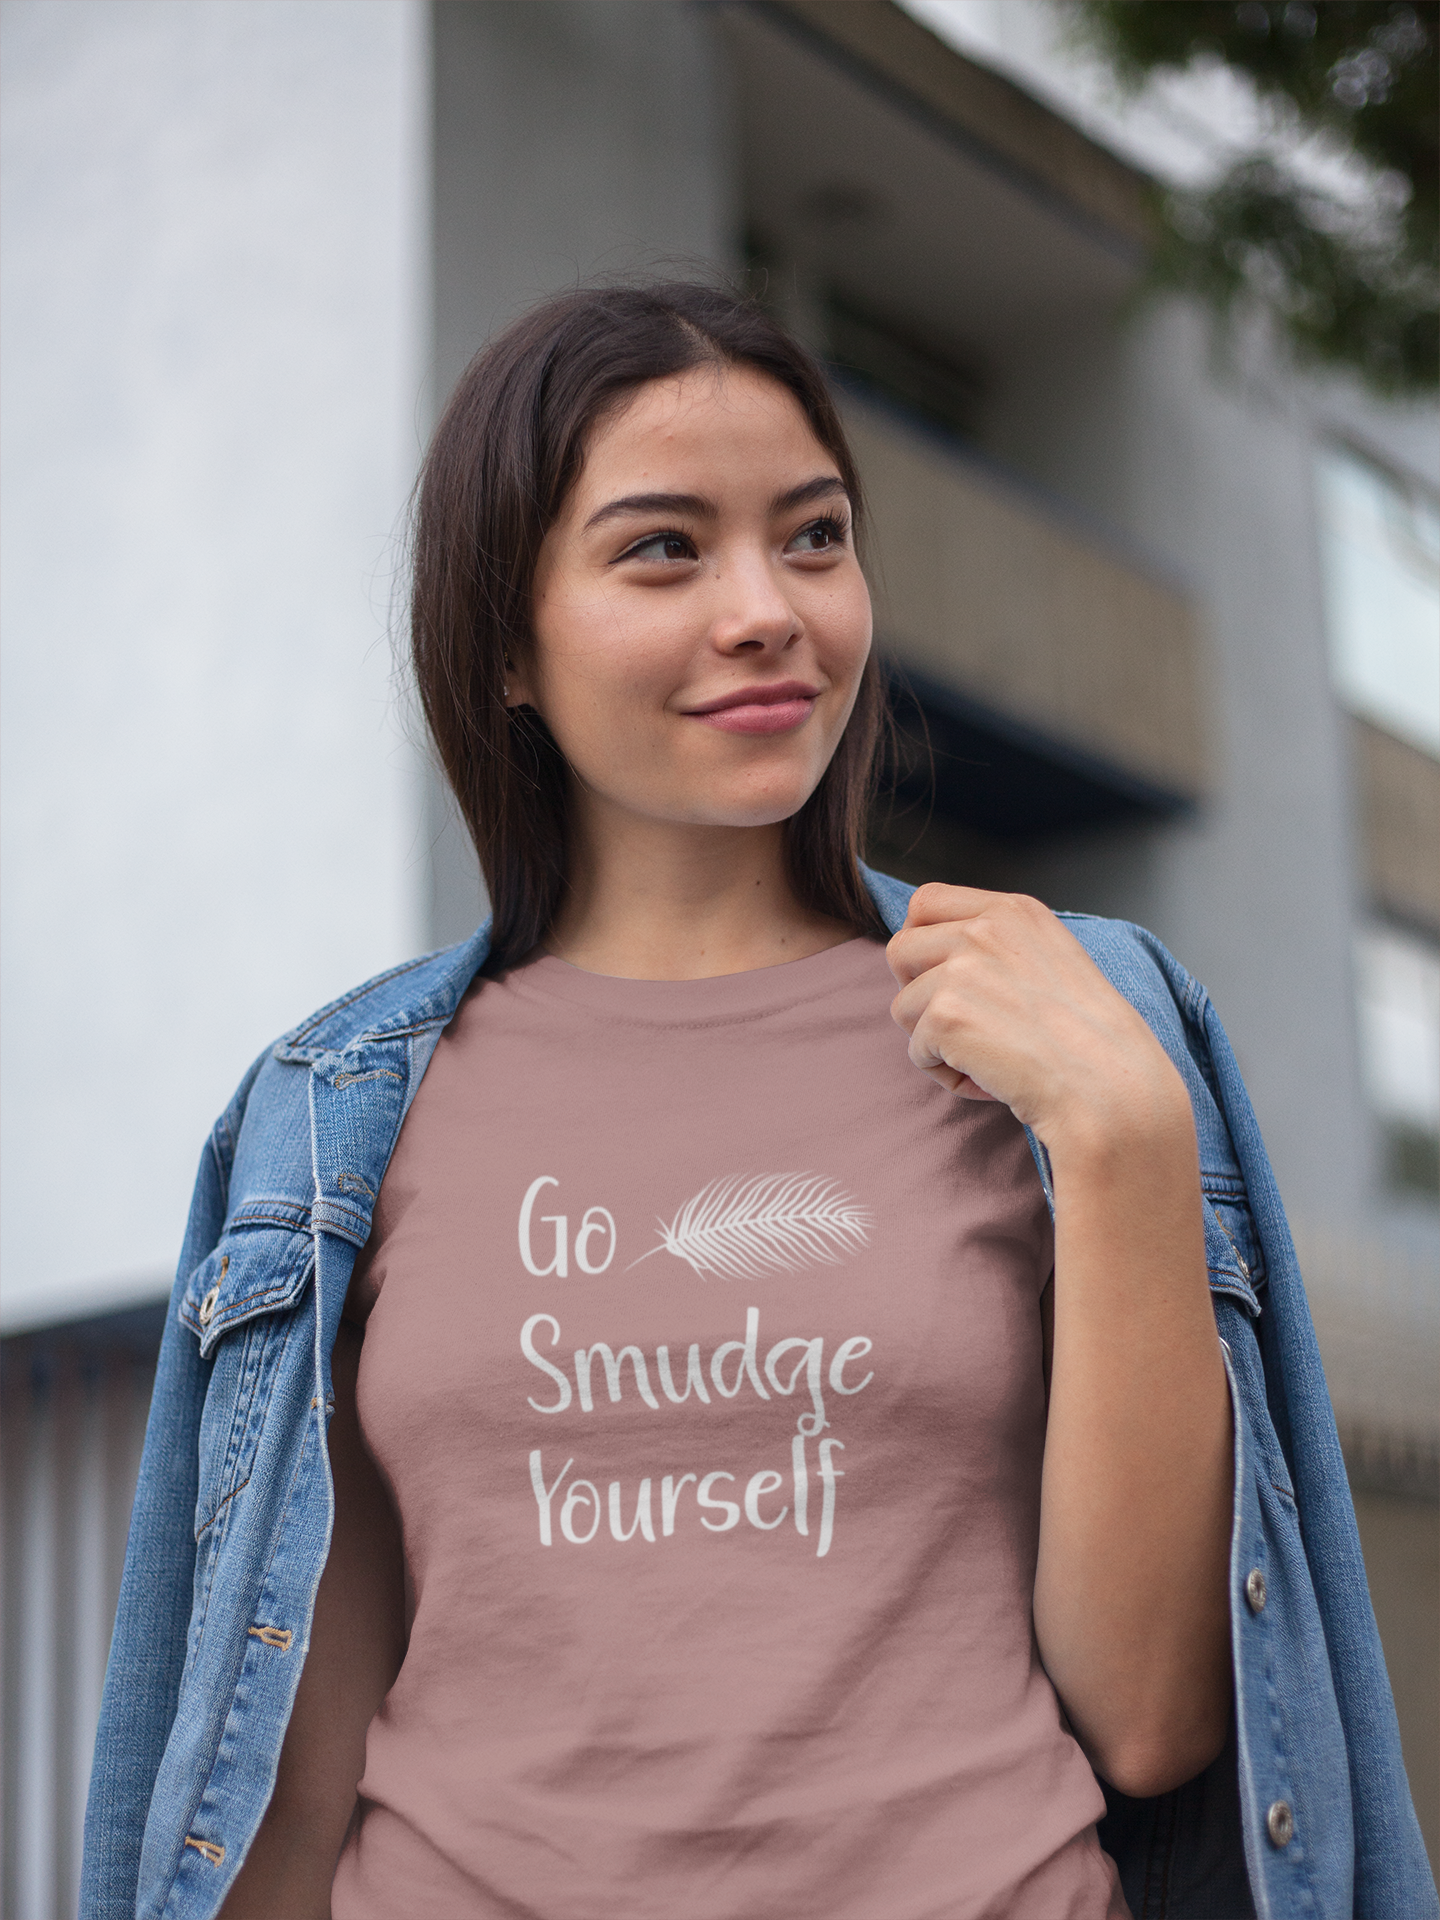 Go smudge yourself funny witch t-shirt